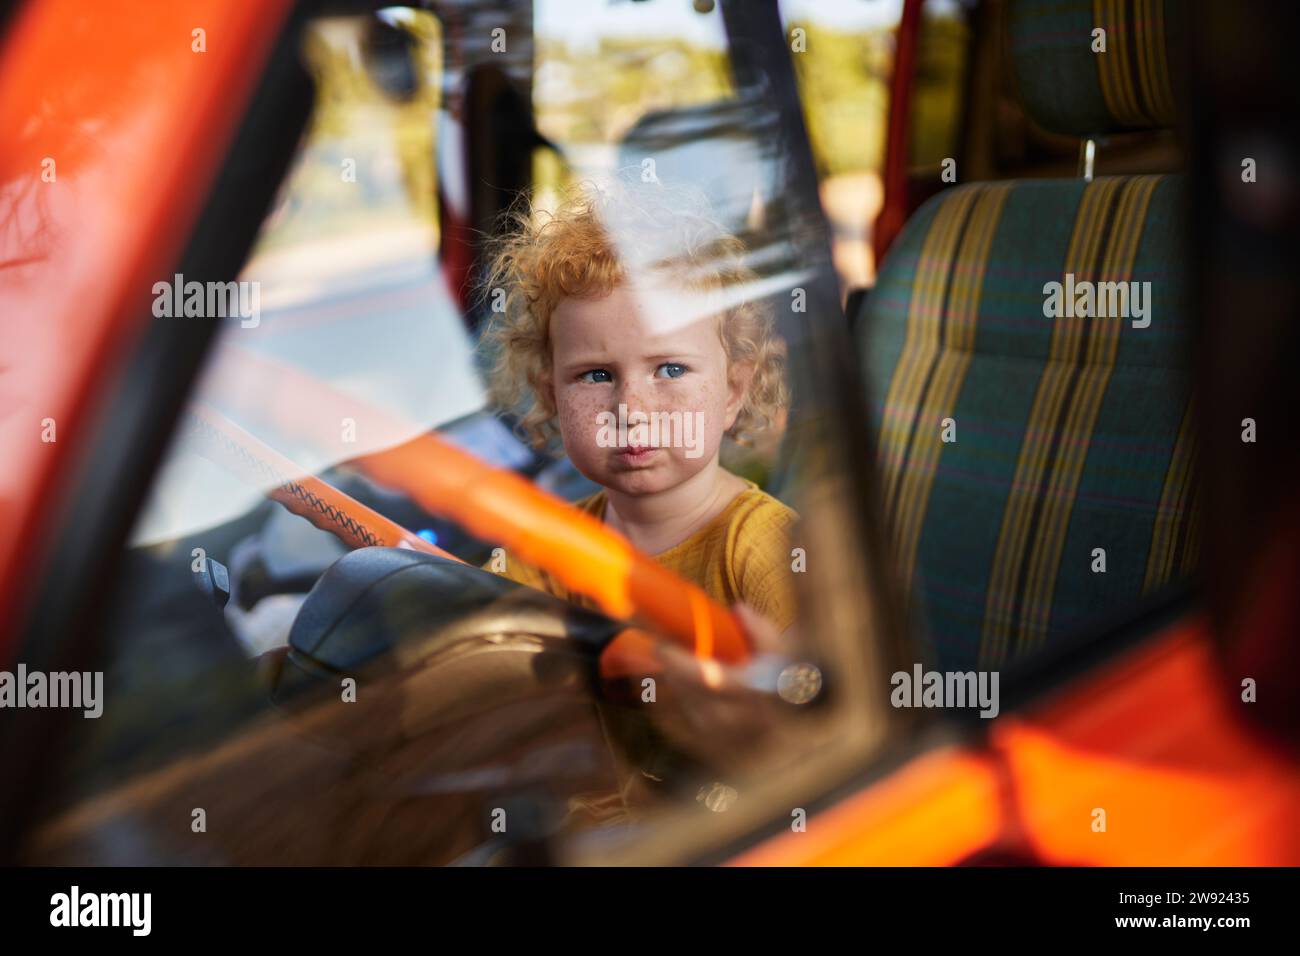 Innocent girl sitting on driver's seat of motor home Stock Photo